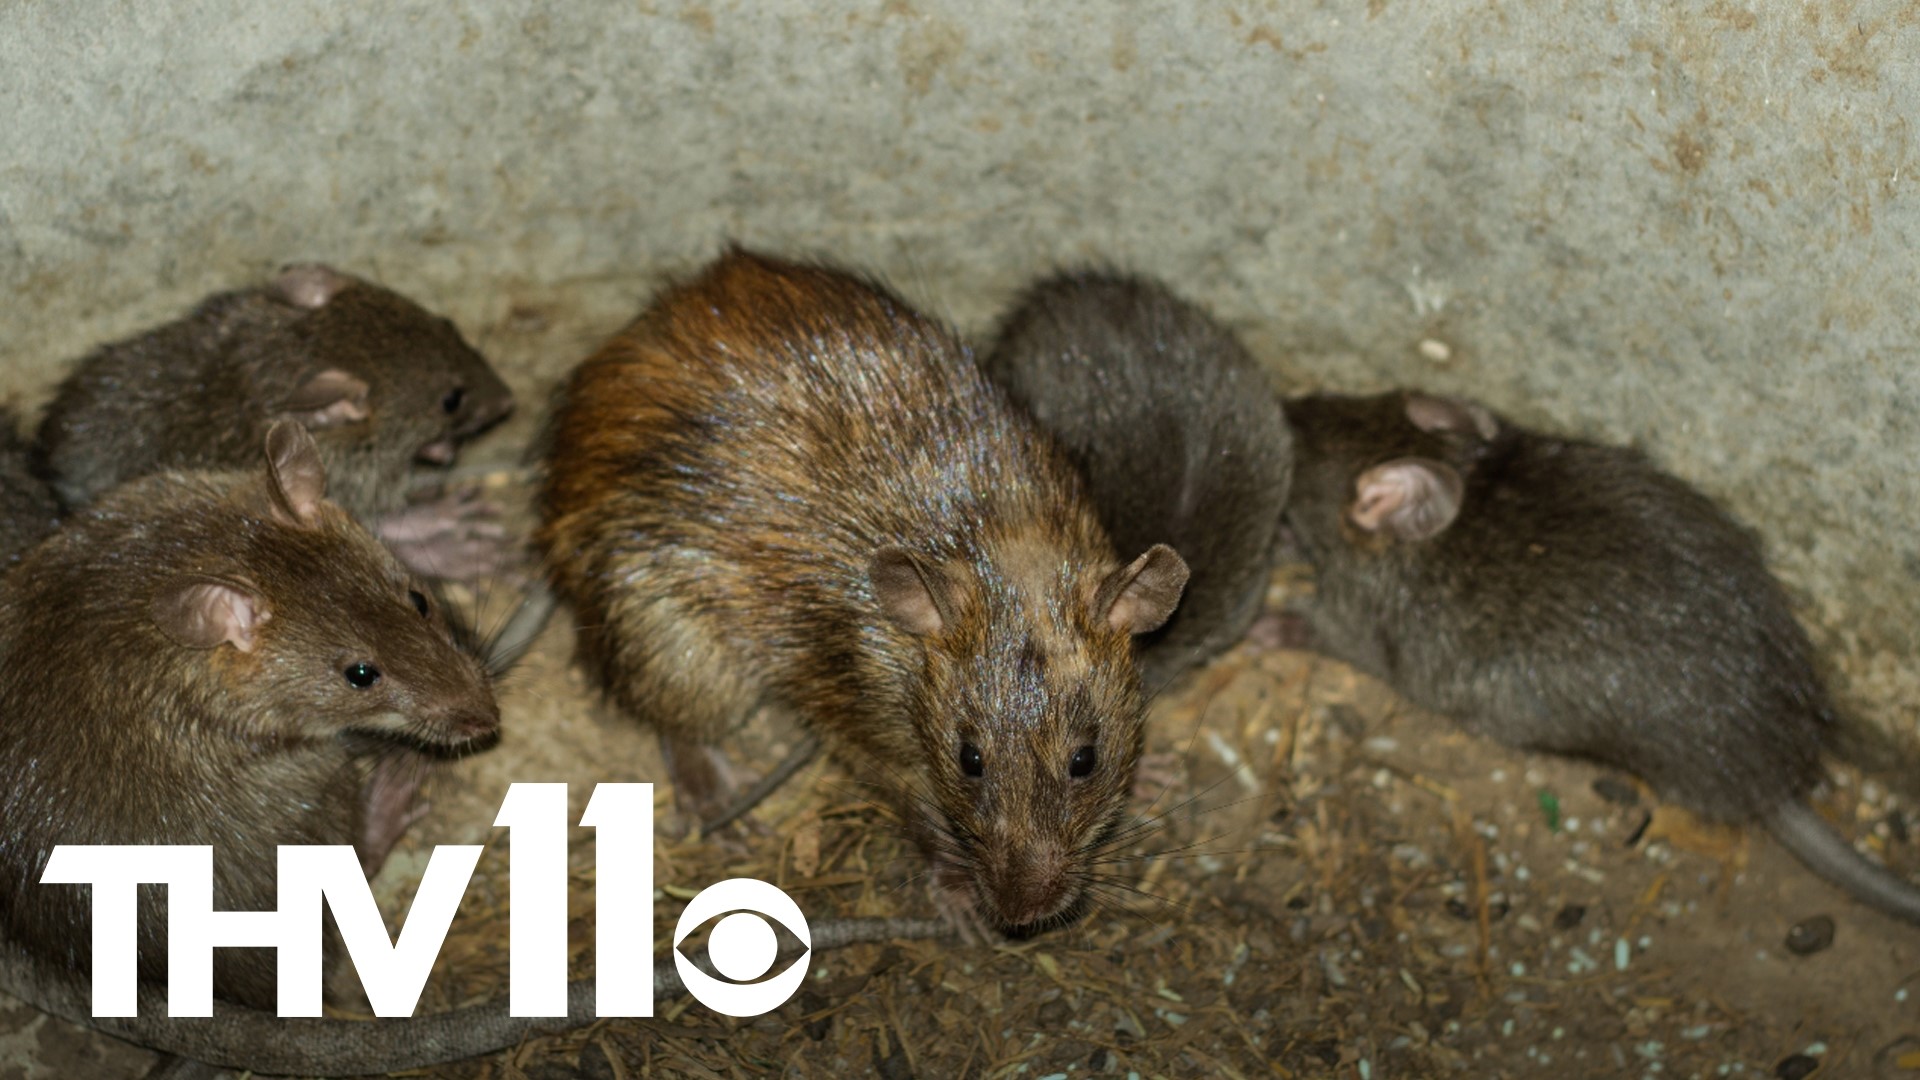 Family Dollar has pleaded guilty and has been ordered to pay $41M after there was a rat infestation at one of their warehouses in Arkansas.